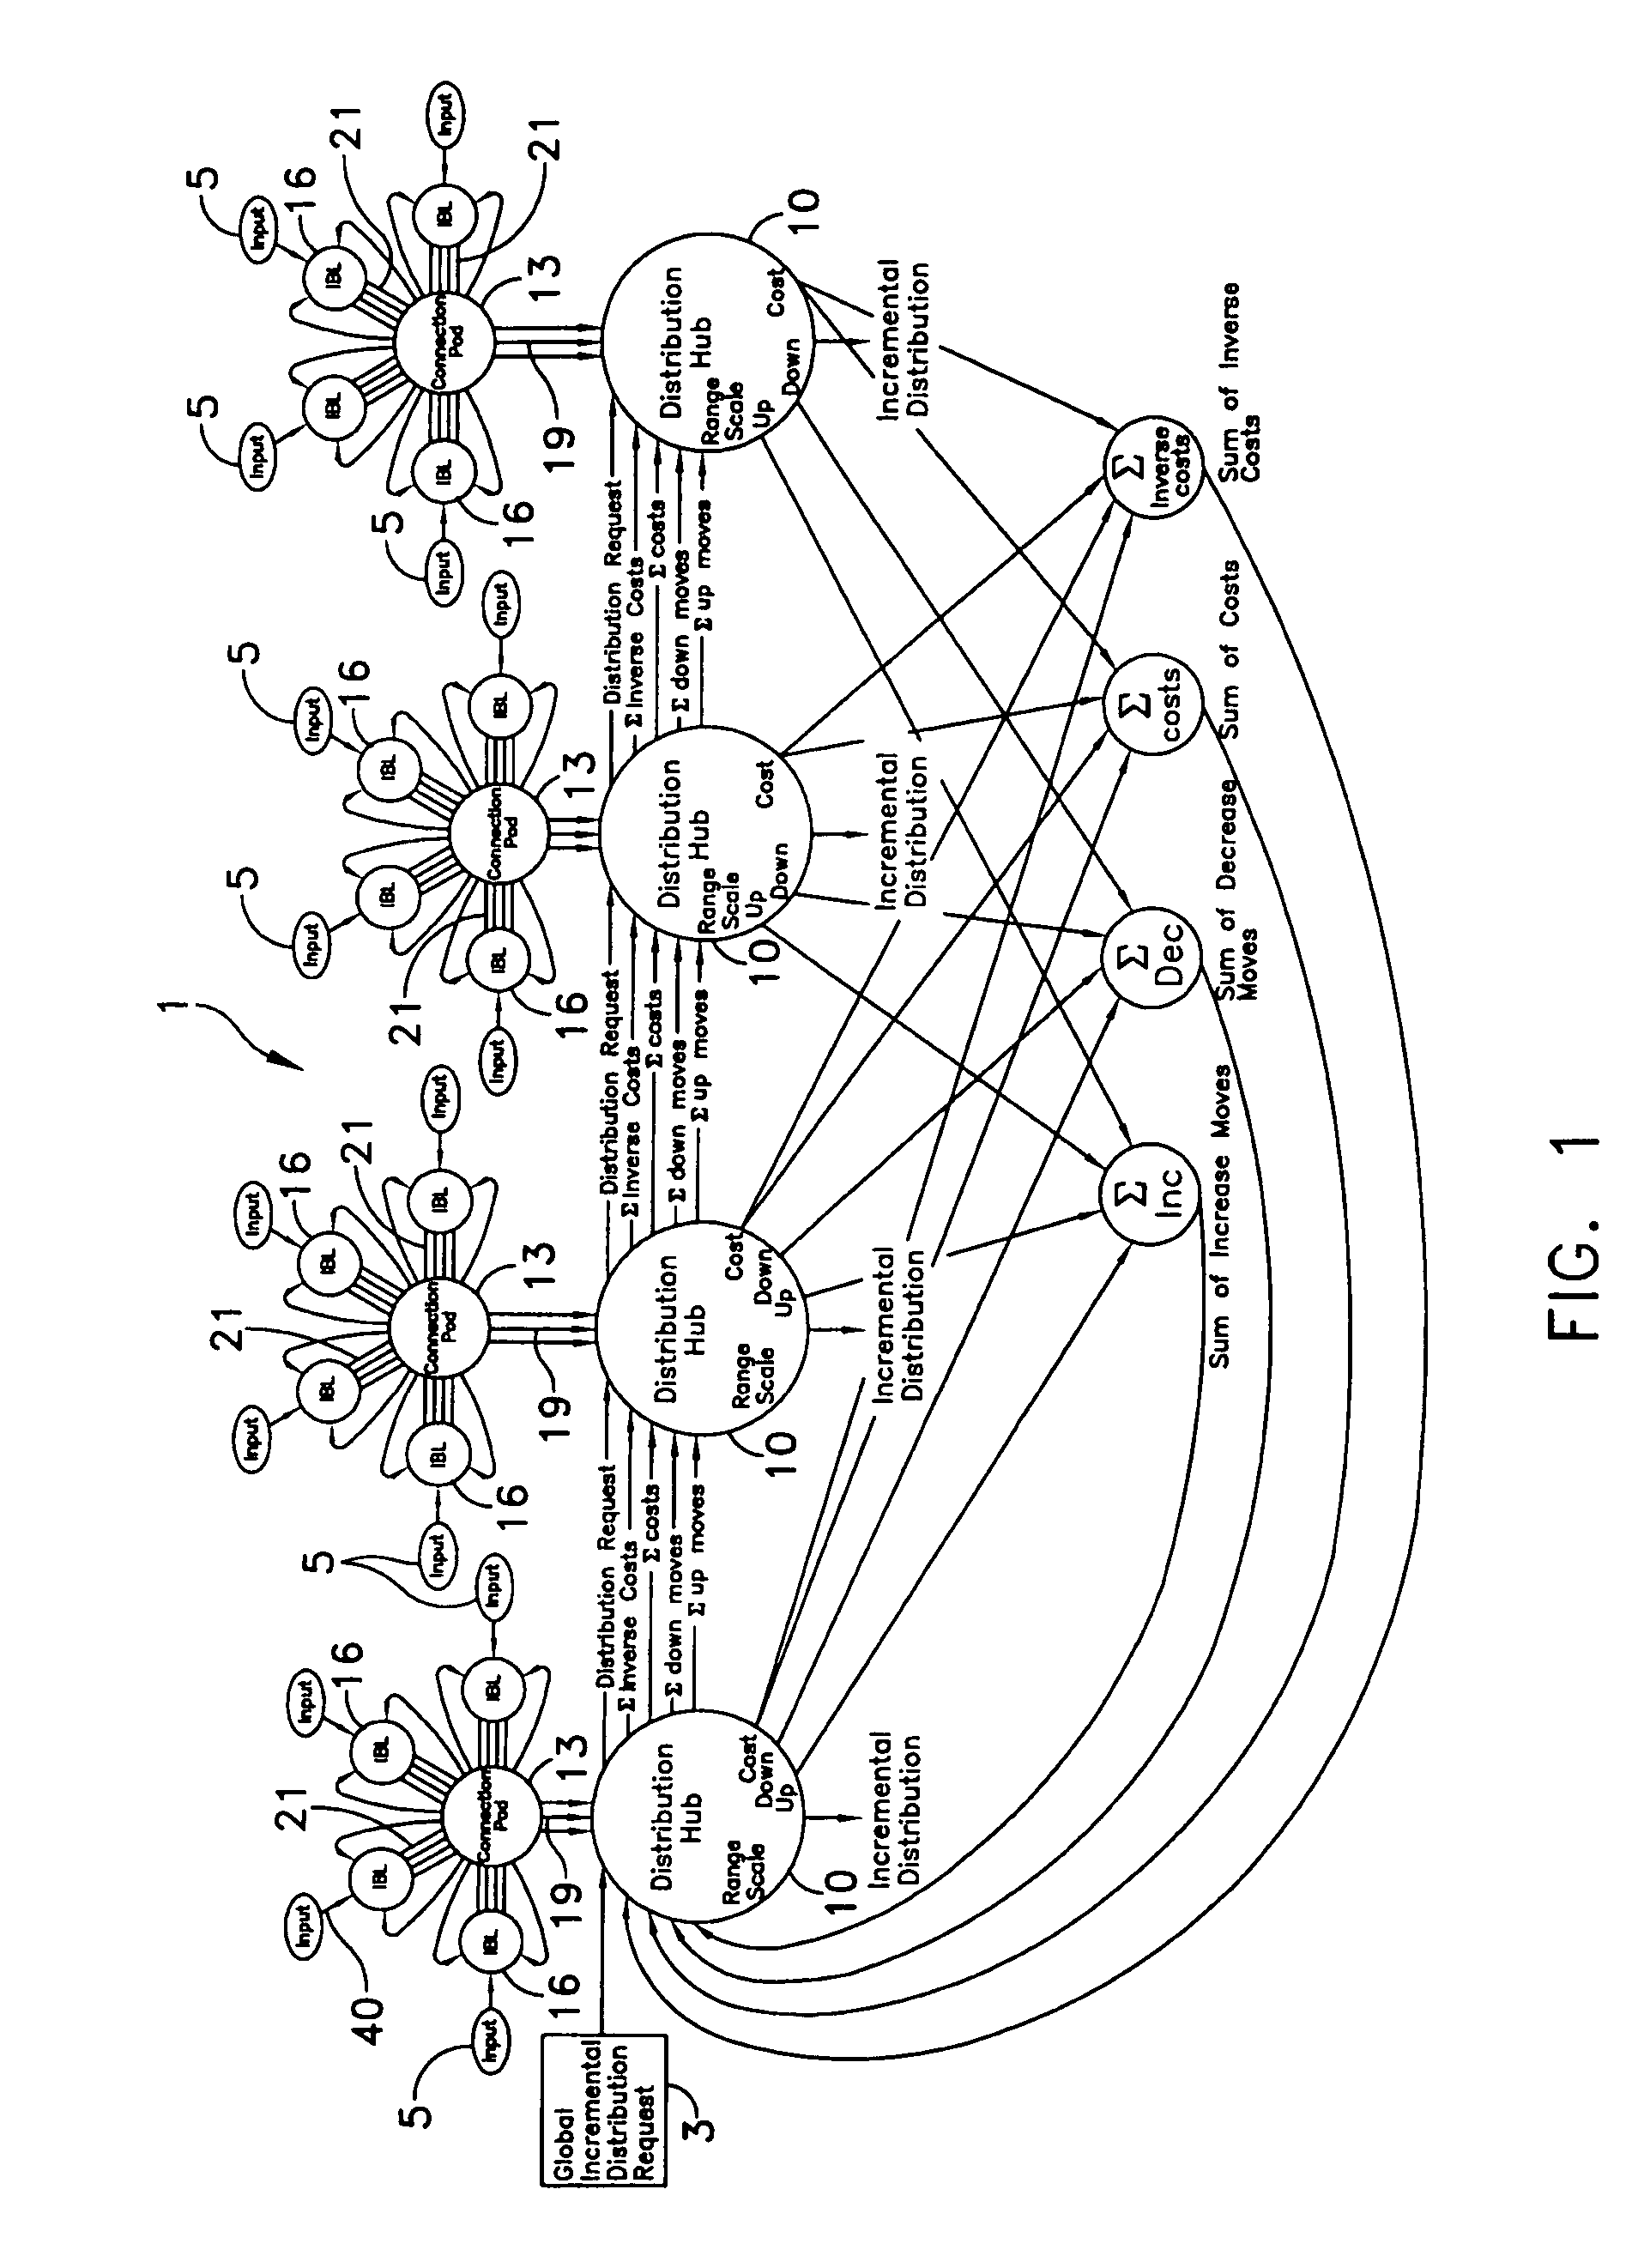 Recurrent distribution network with input boundary limiters